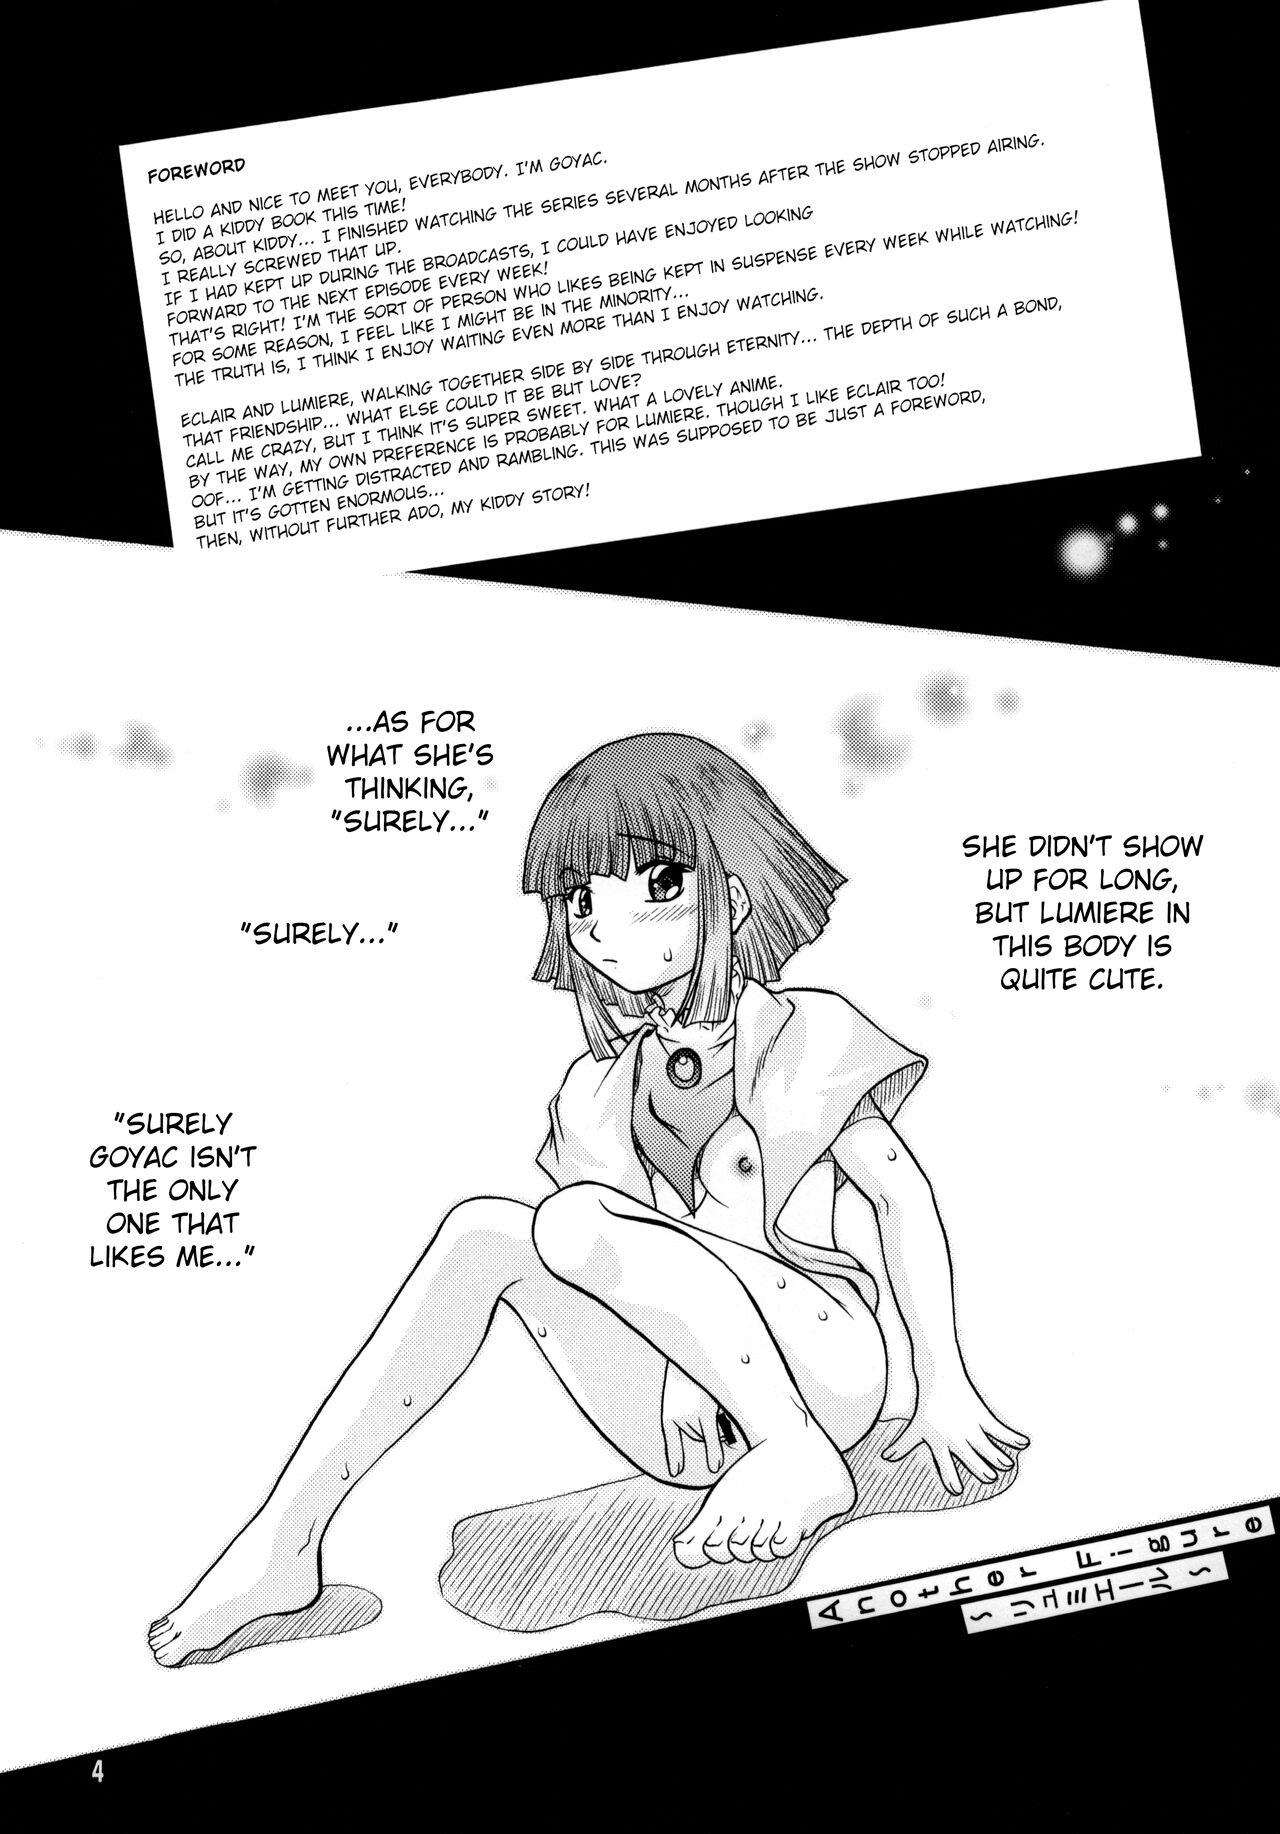 Femdom Anna Toko mo Konna Toko mo Elegant♪ | Both Places Like That and Places Like This Are Elegant♪ - Kiddy grade Wanking - Page 3